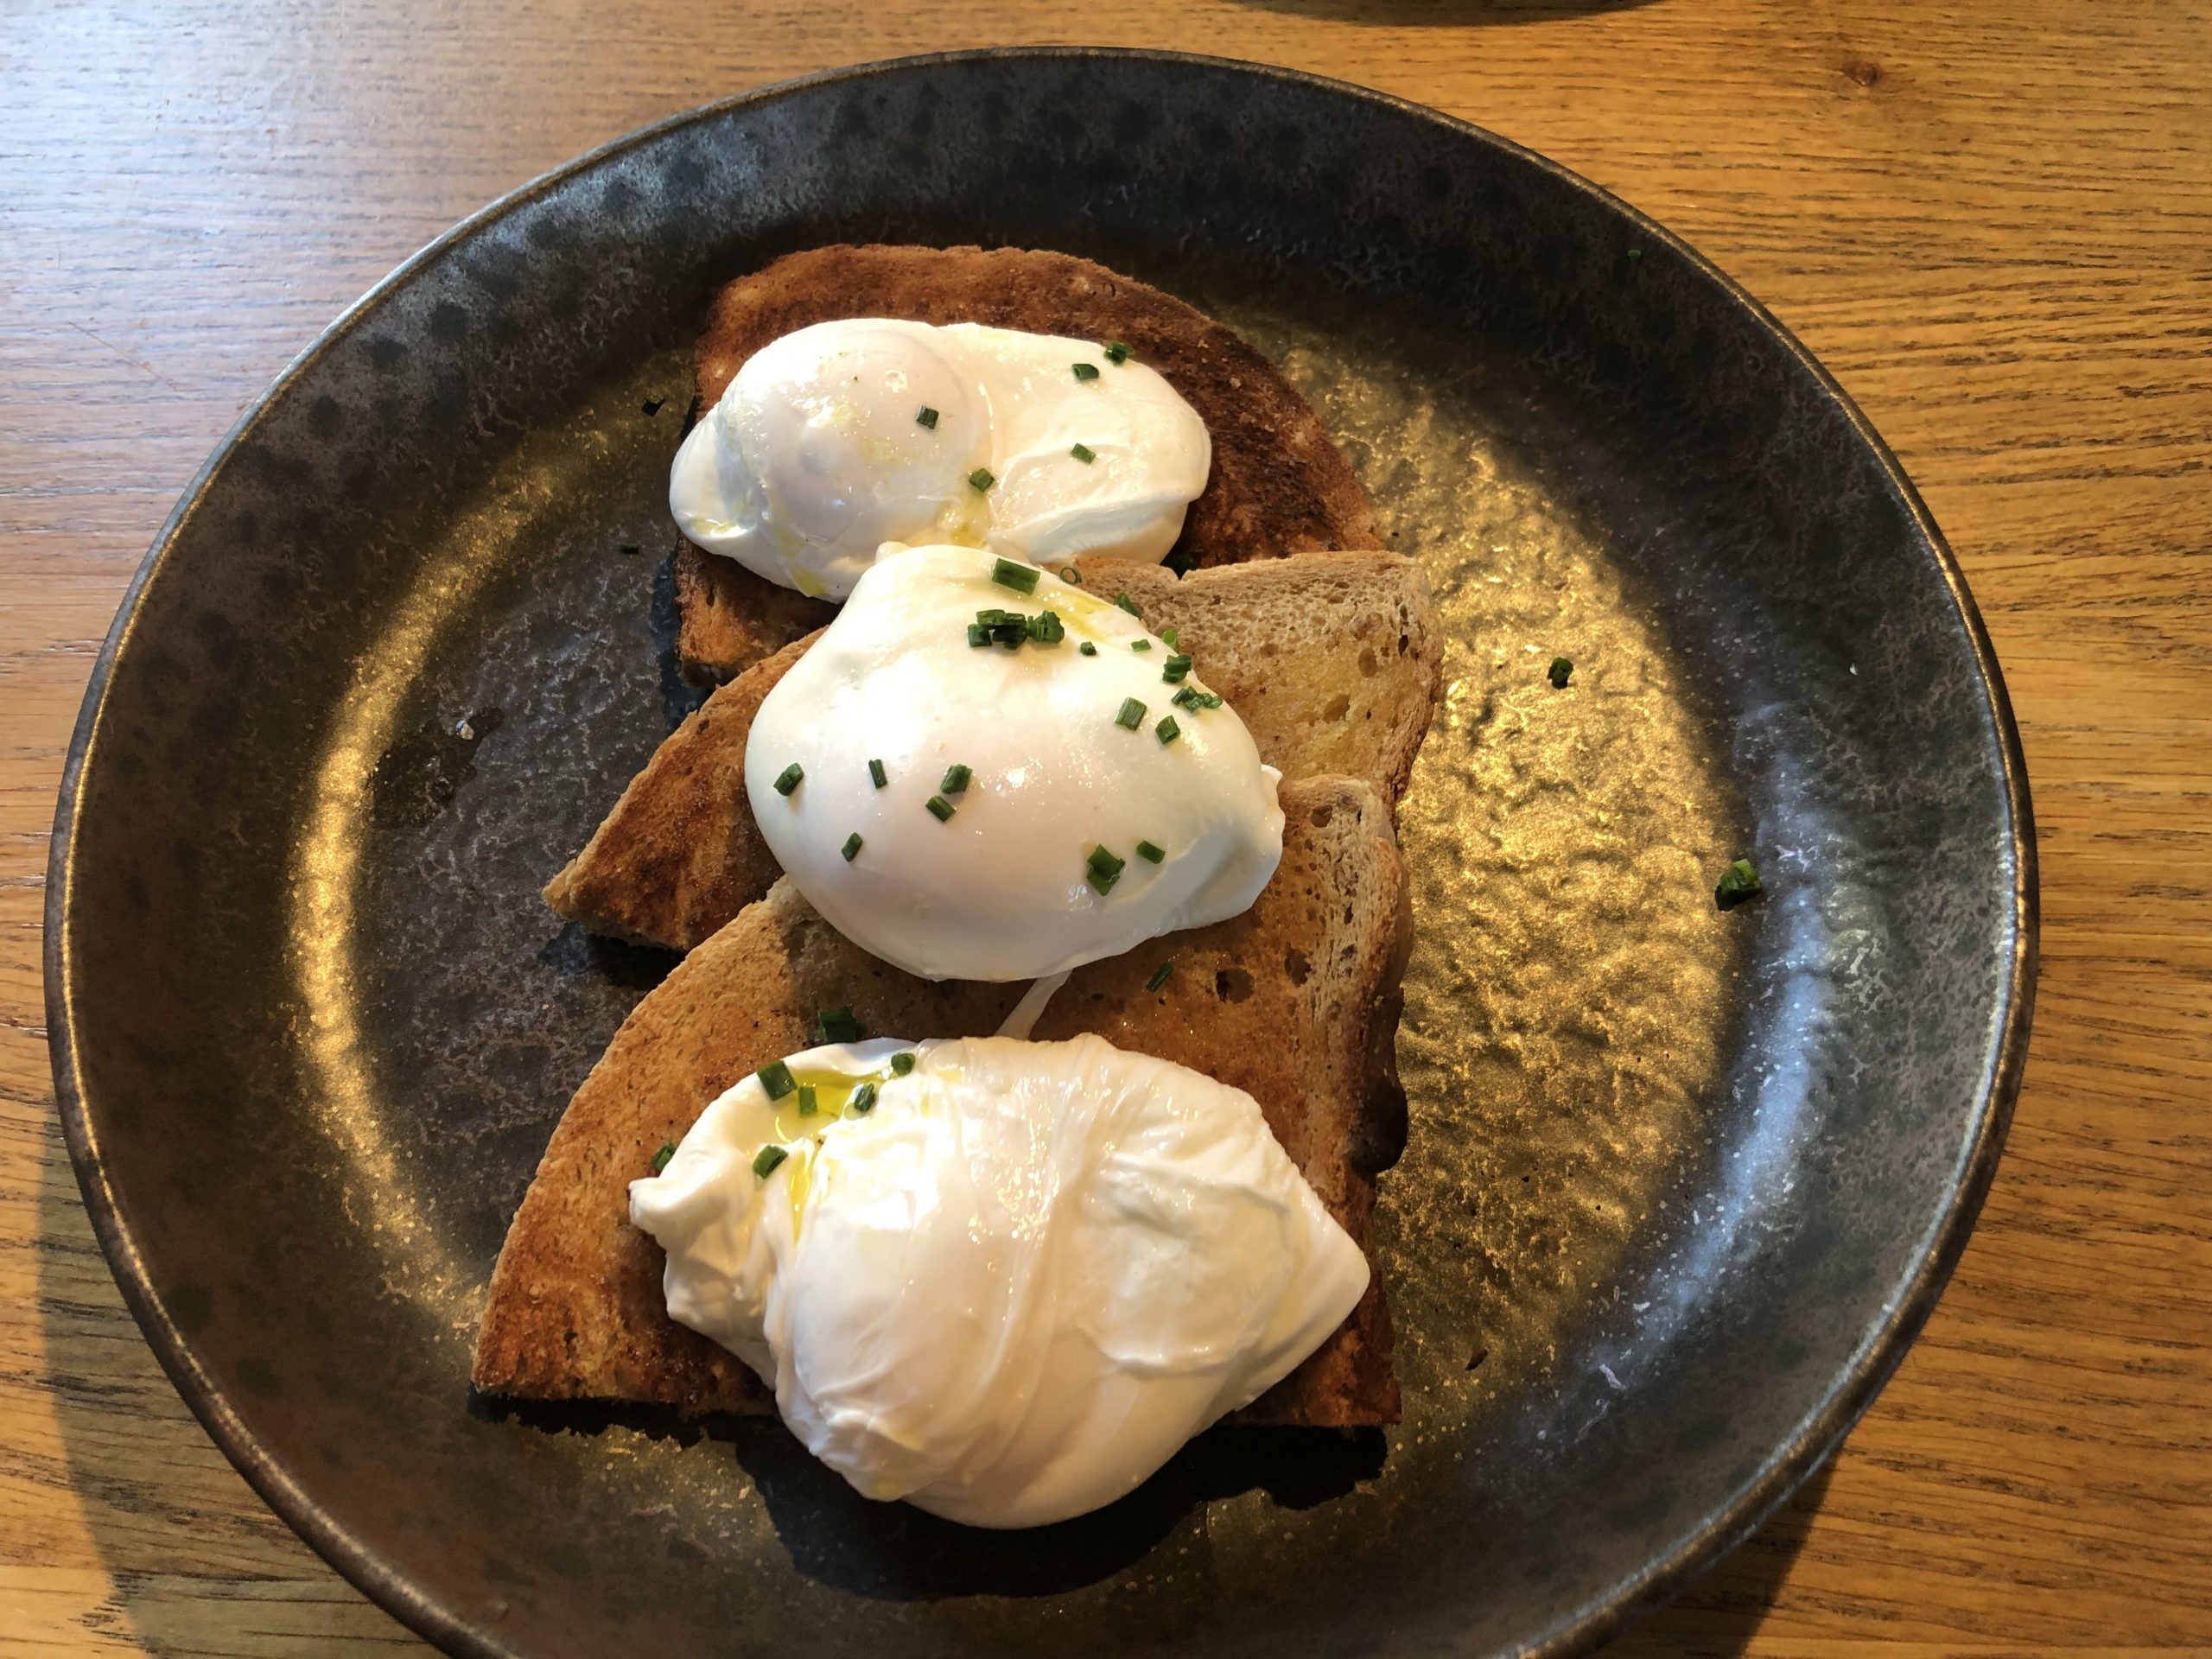 Poached eggs at the Pier Hotel